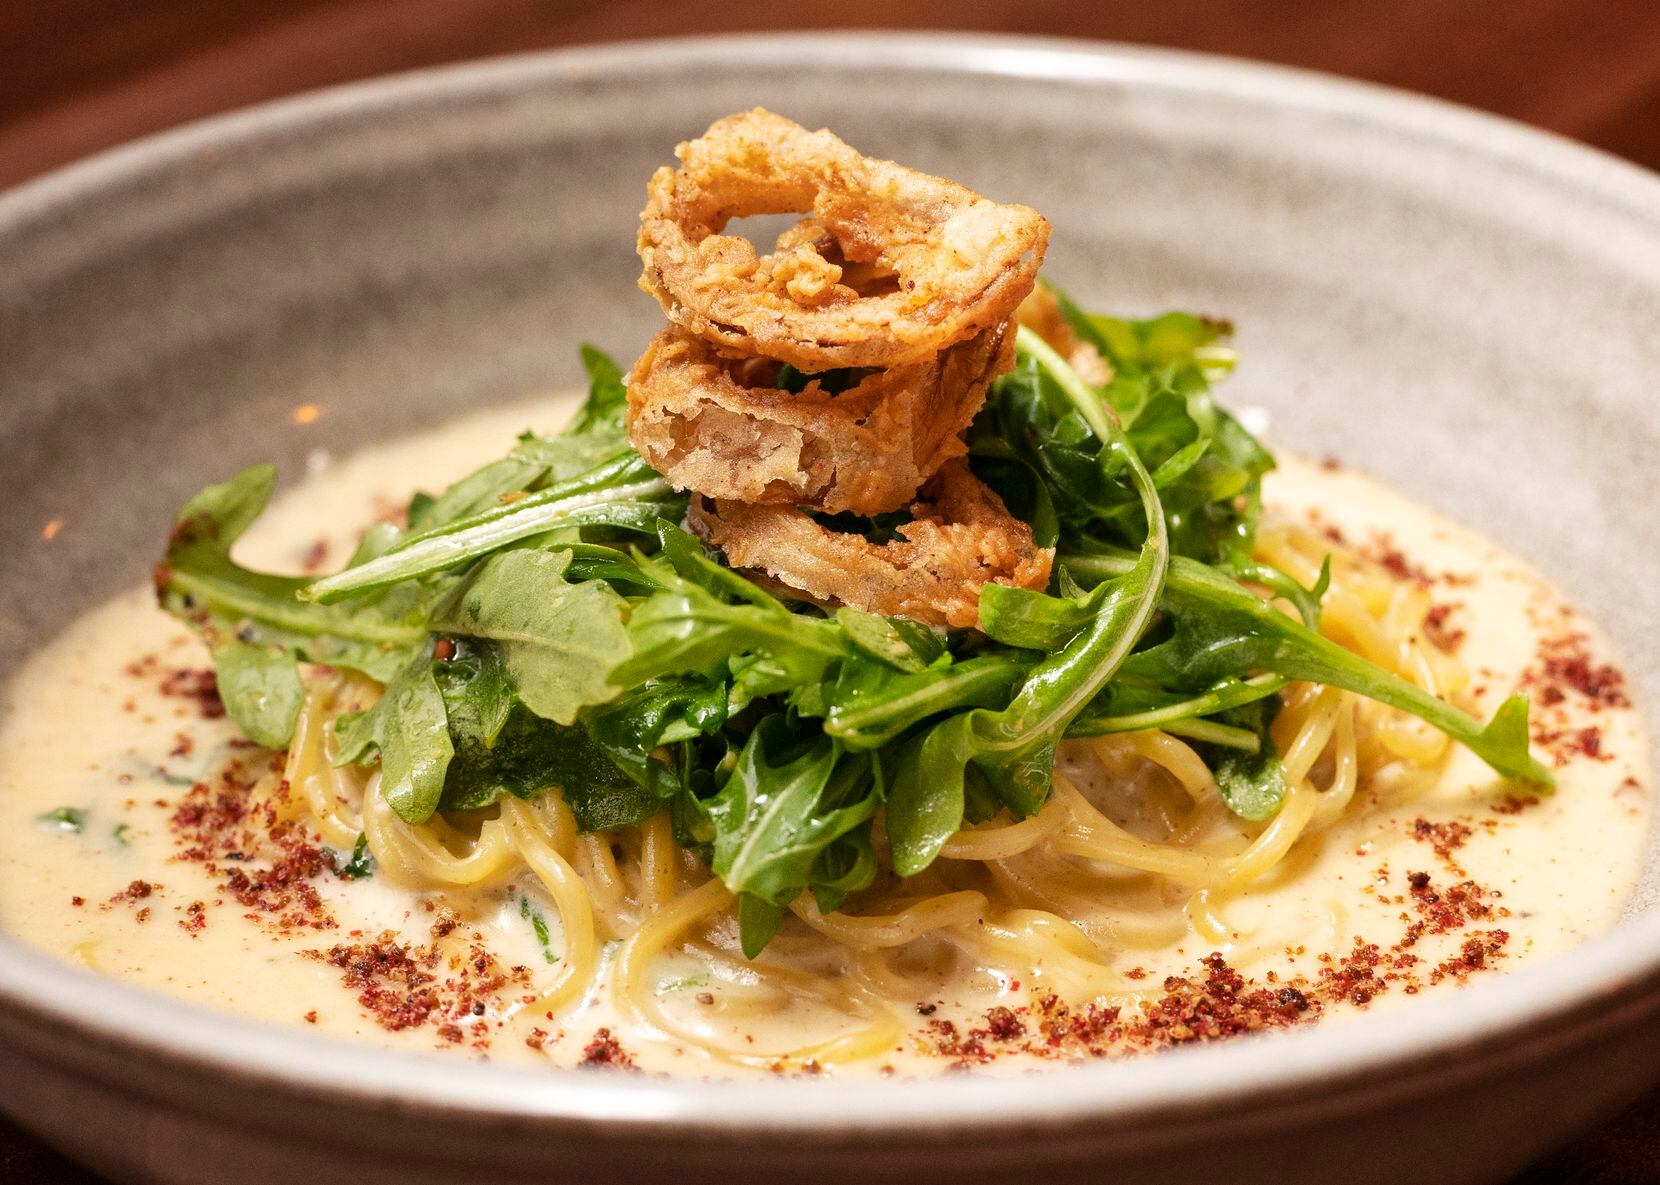 Cacio e pepe is made with housemade pasta. It's one of Rye's more recognizable dishes.